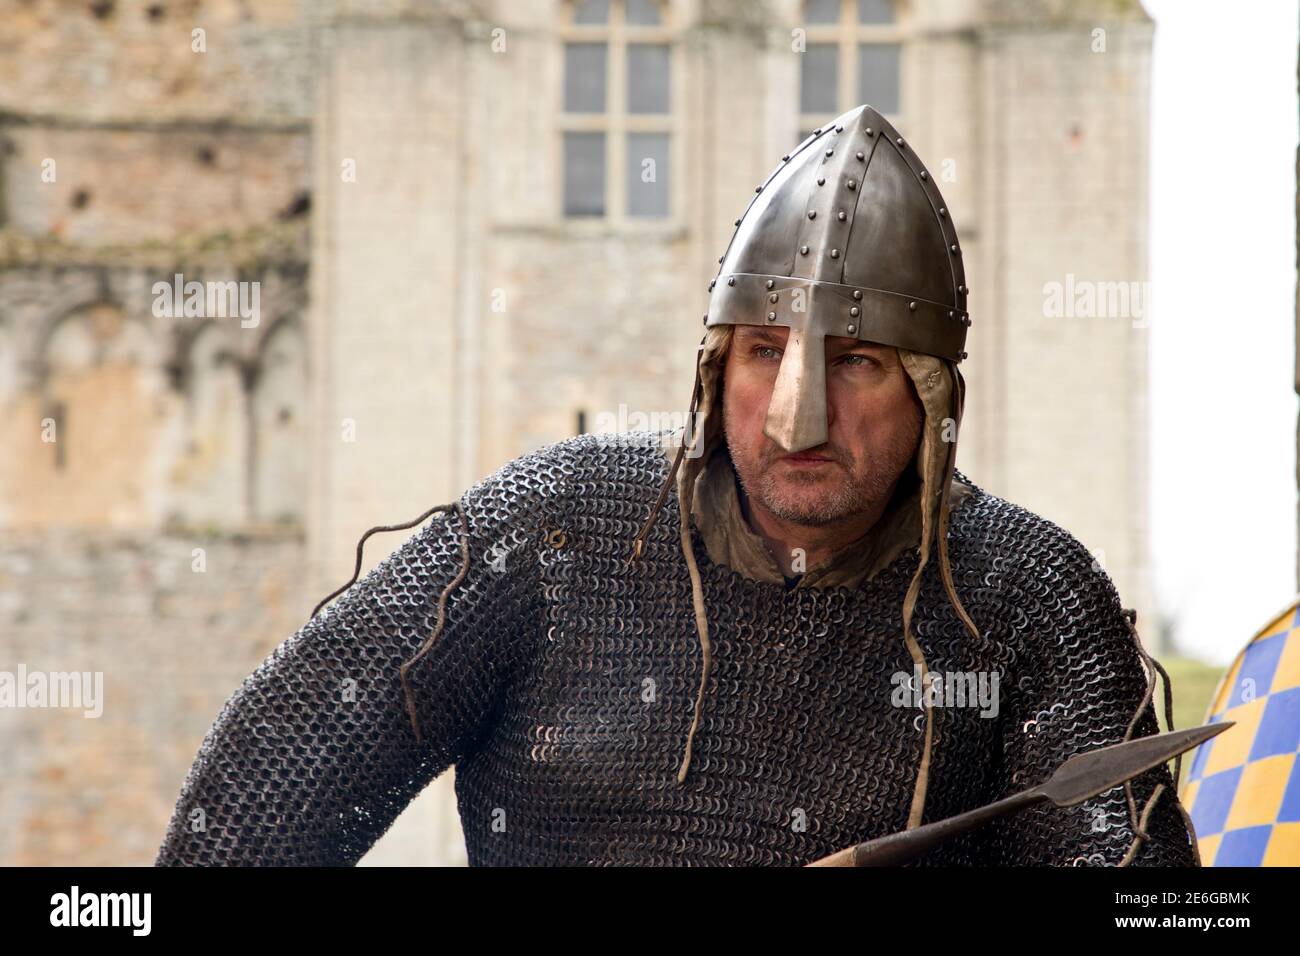 12th century soldier keeping warm by brazier outside 12th century castle Stock Photo